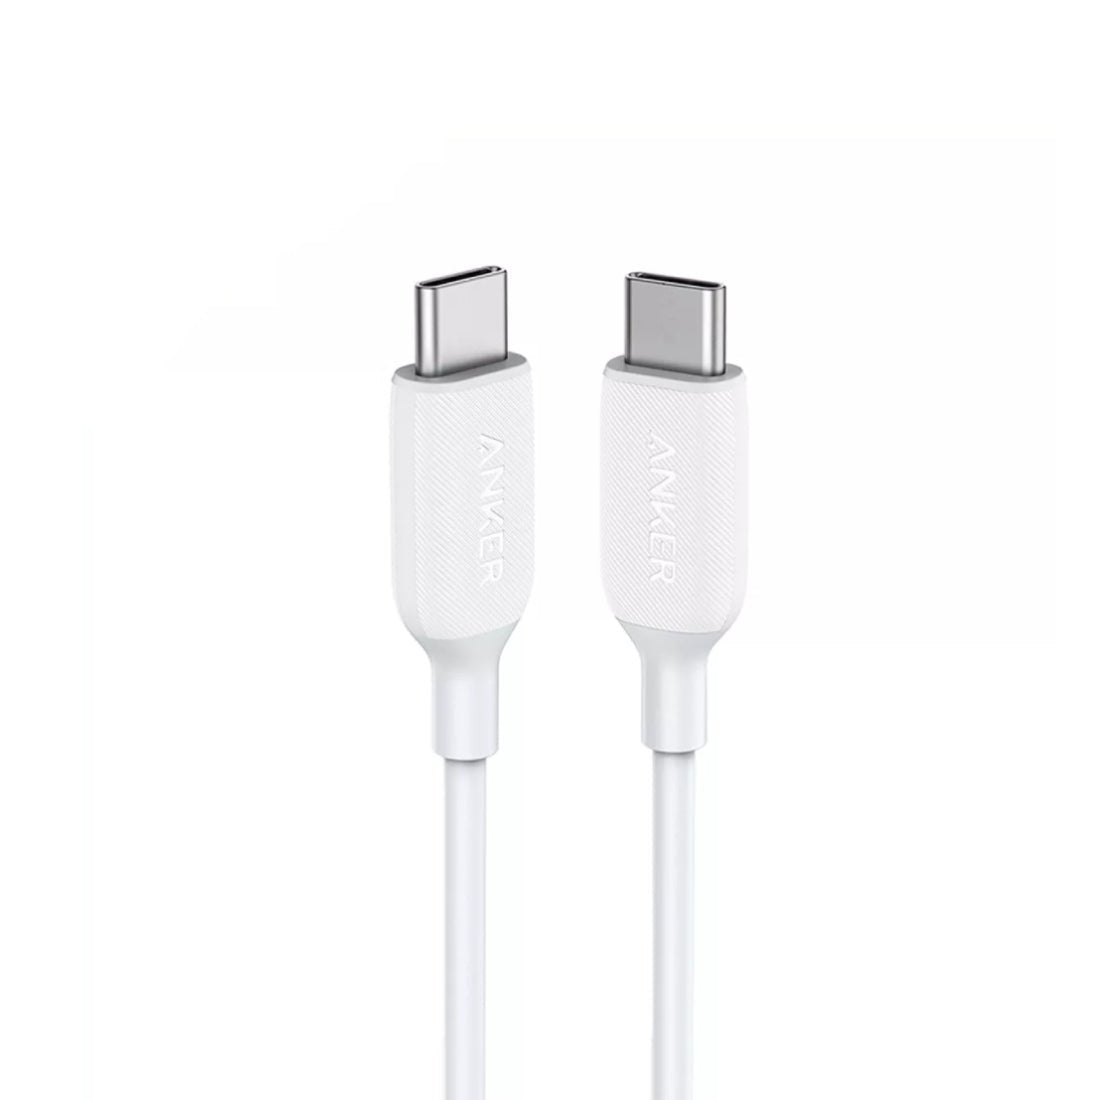 Anker PowerLine III 3ft USB-C to USB-C Cable - White - كابل - Store 974 | ستور ٩٧٤